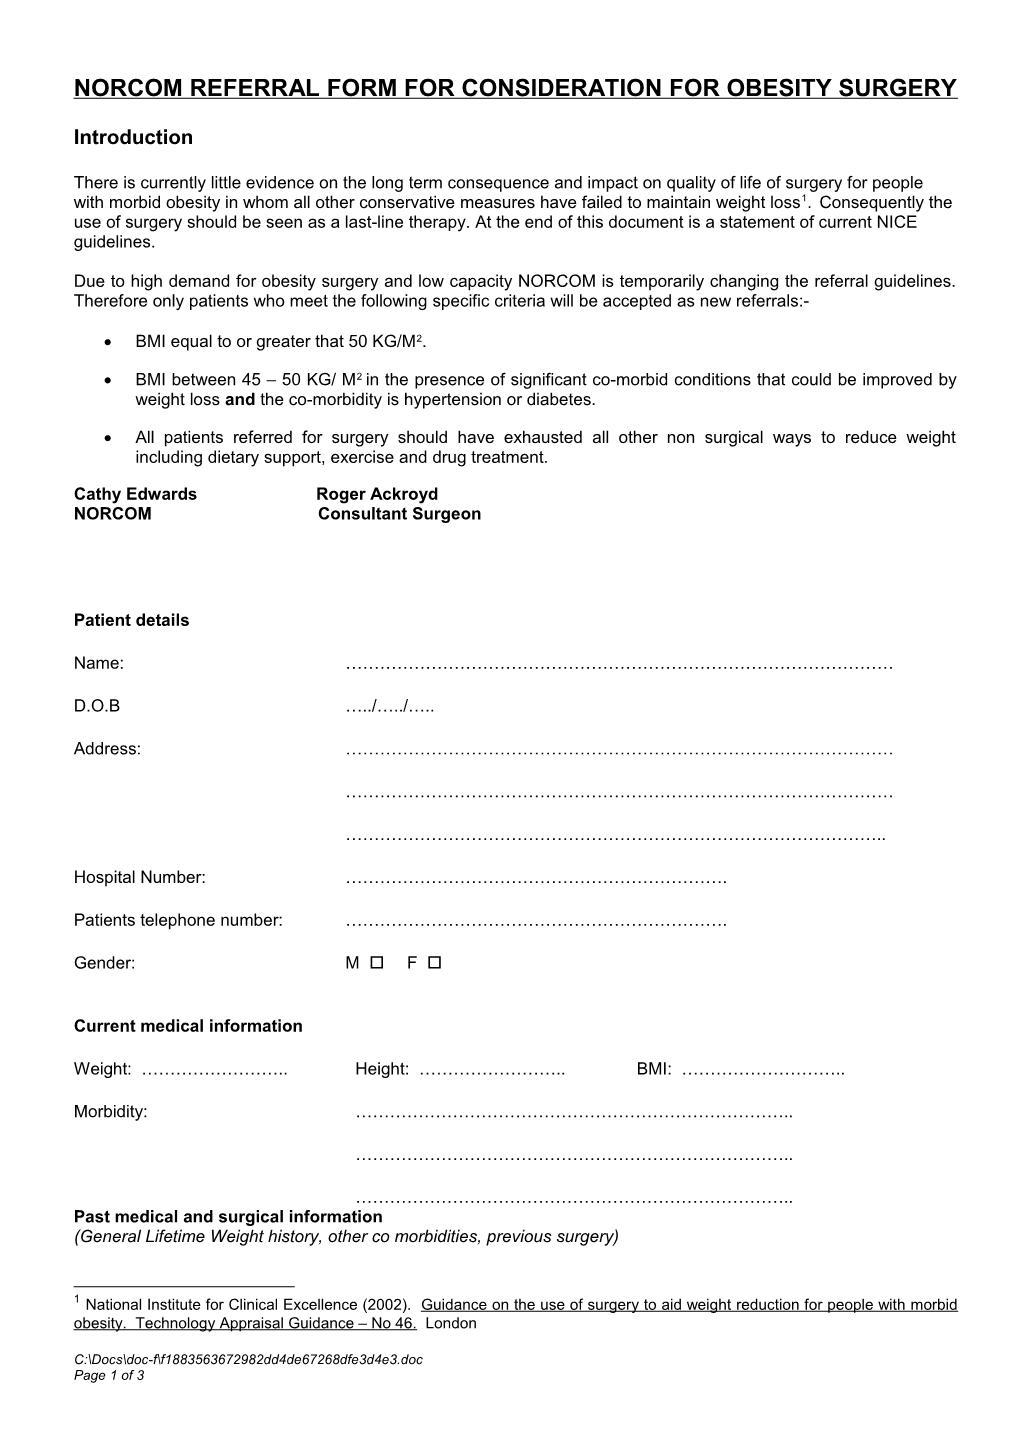 Norcom Referral Form for Consideration for Obesity Surgery